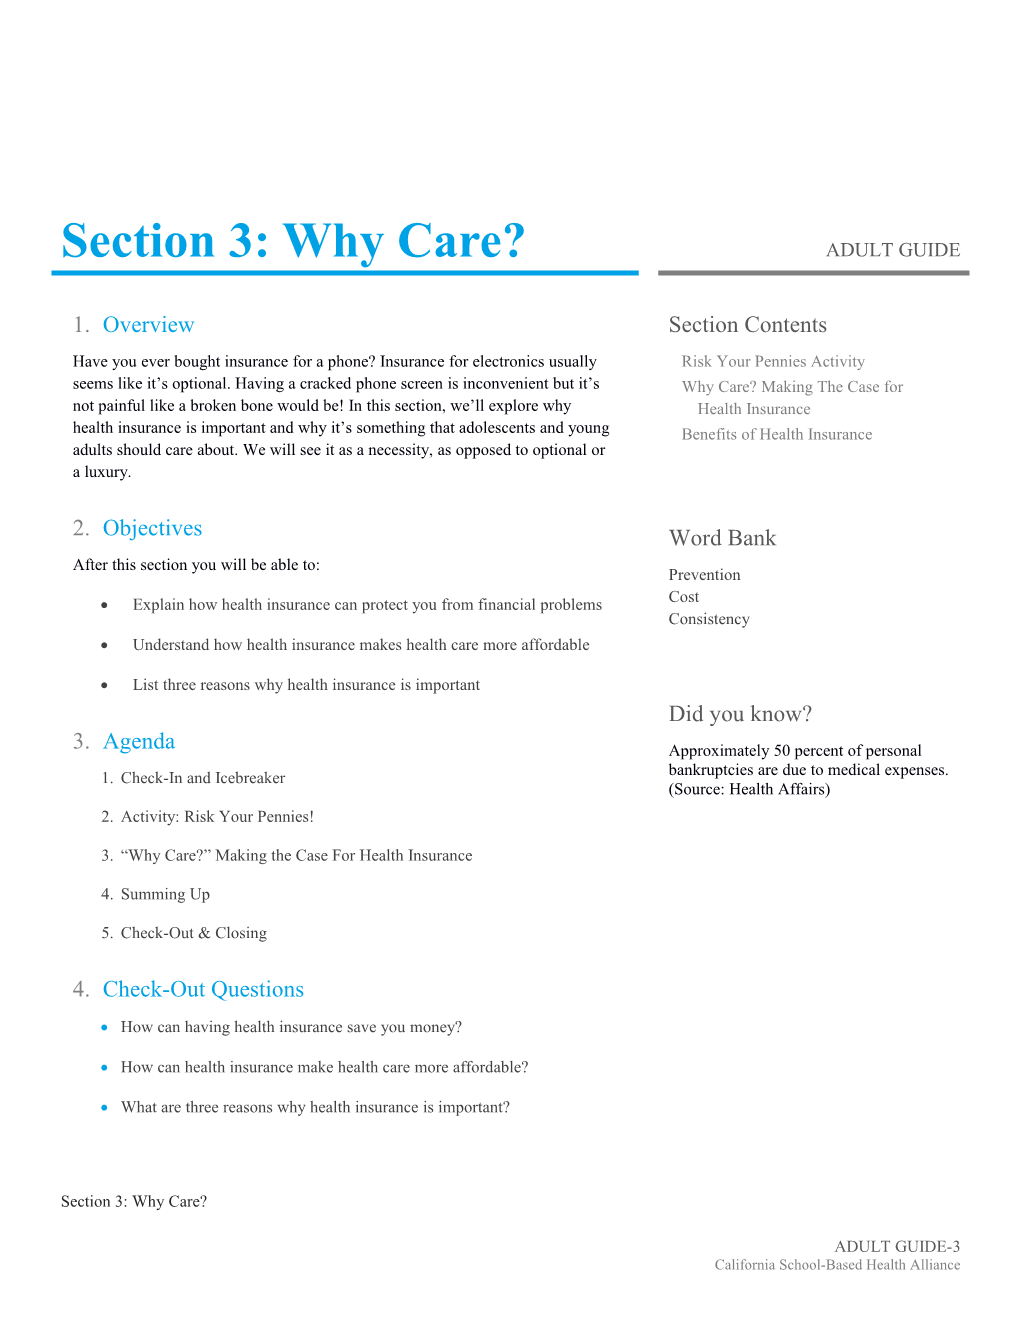 Section 3: Why Care?